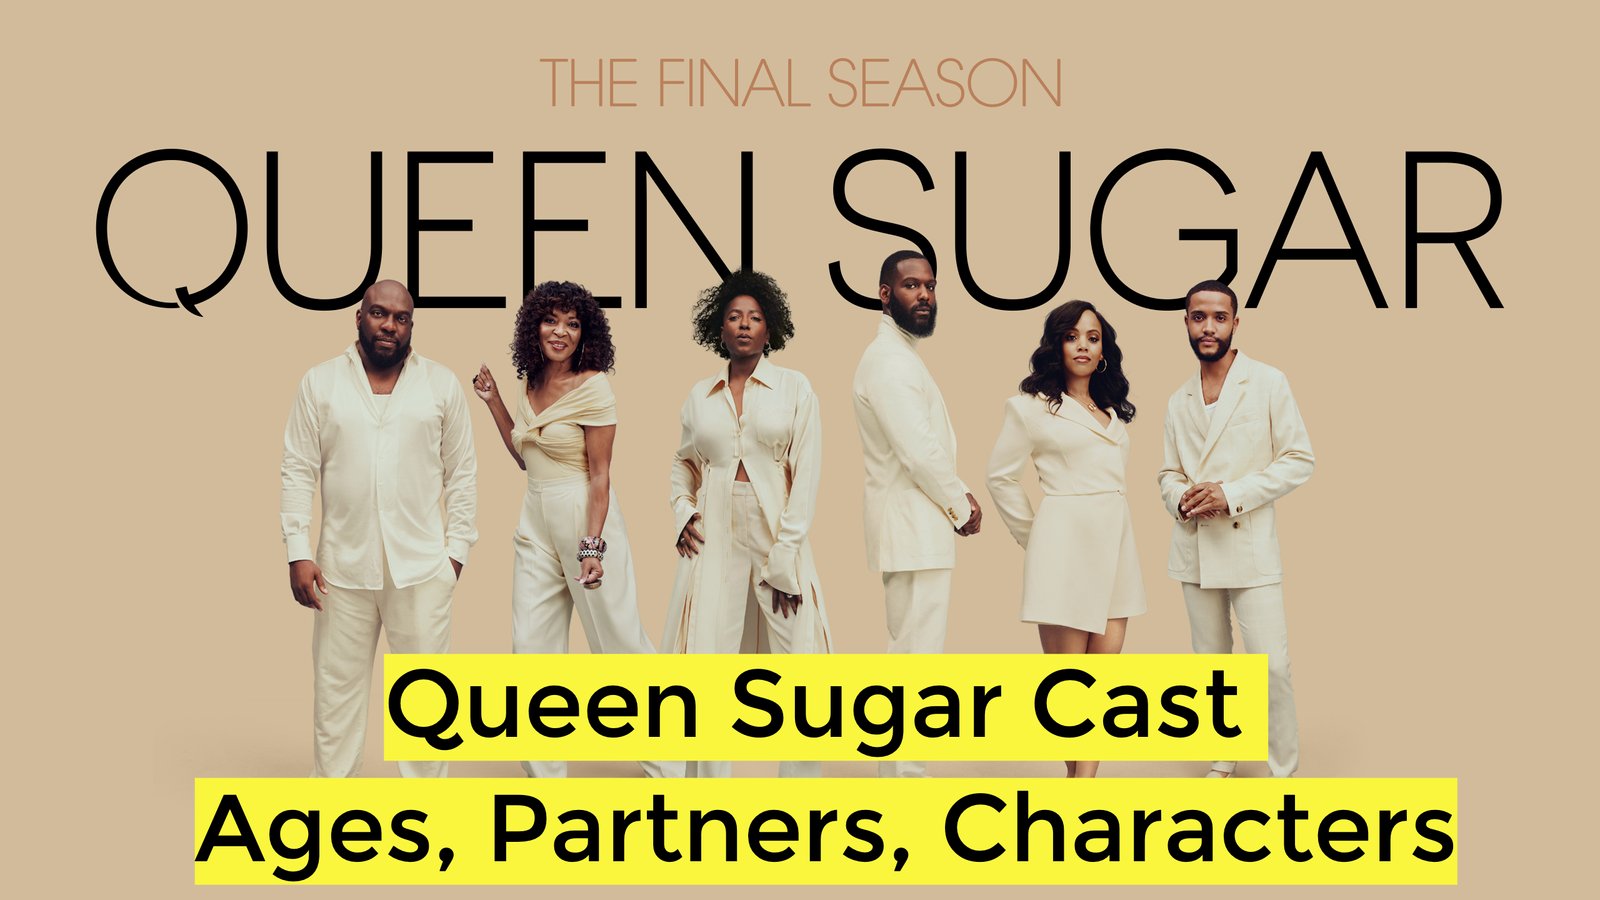 Queen Sugar Cast - Ages, Partners, Characters